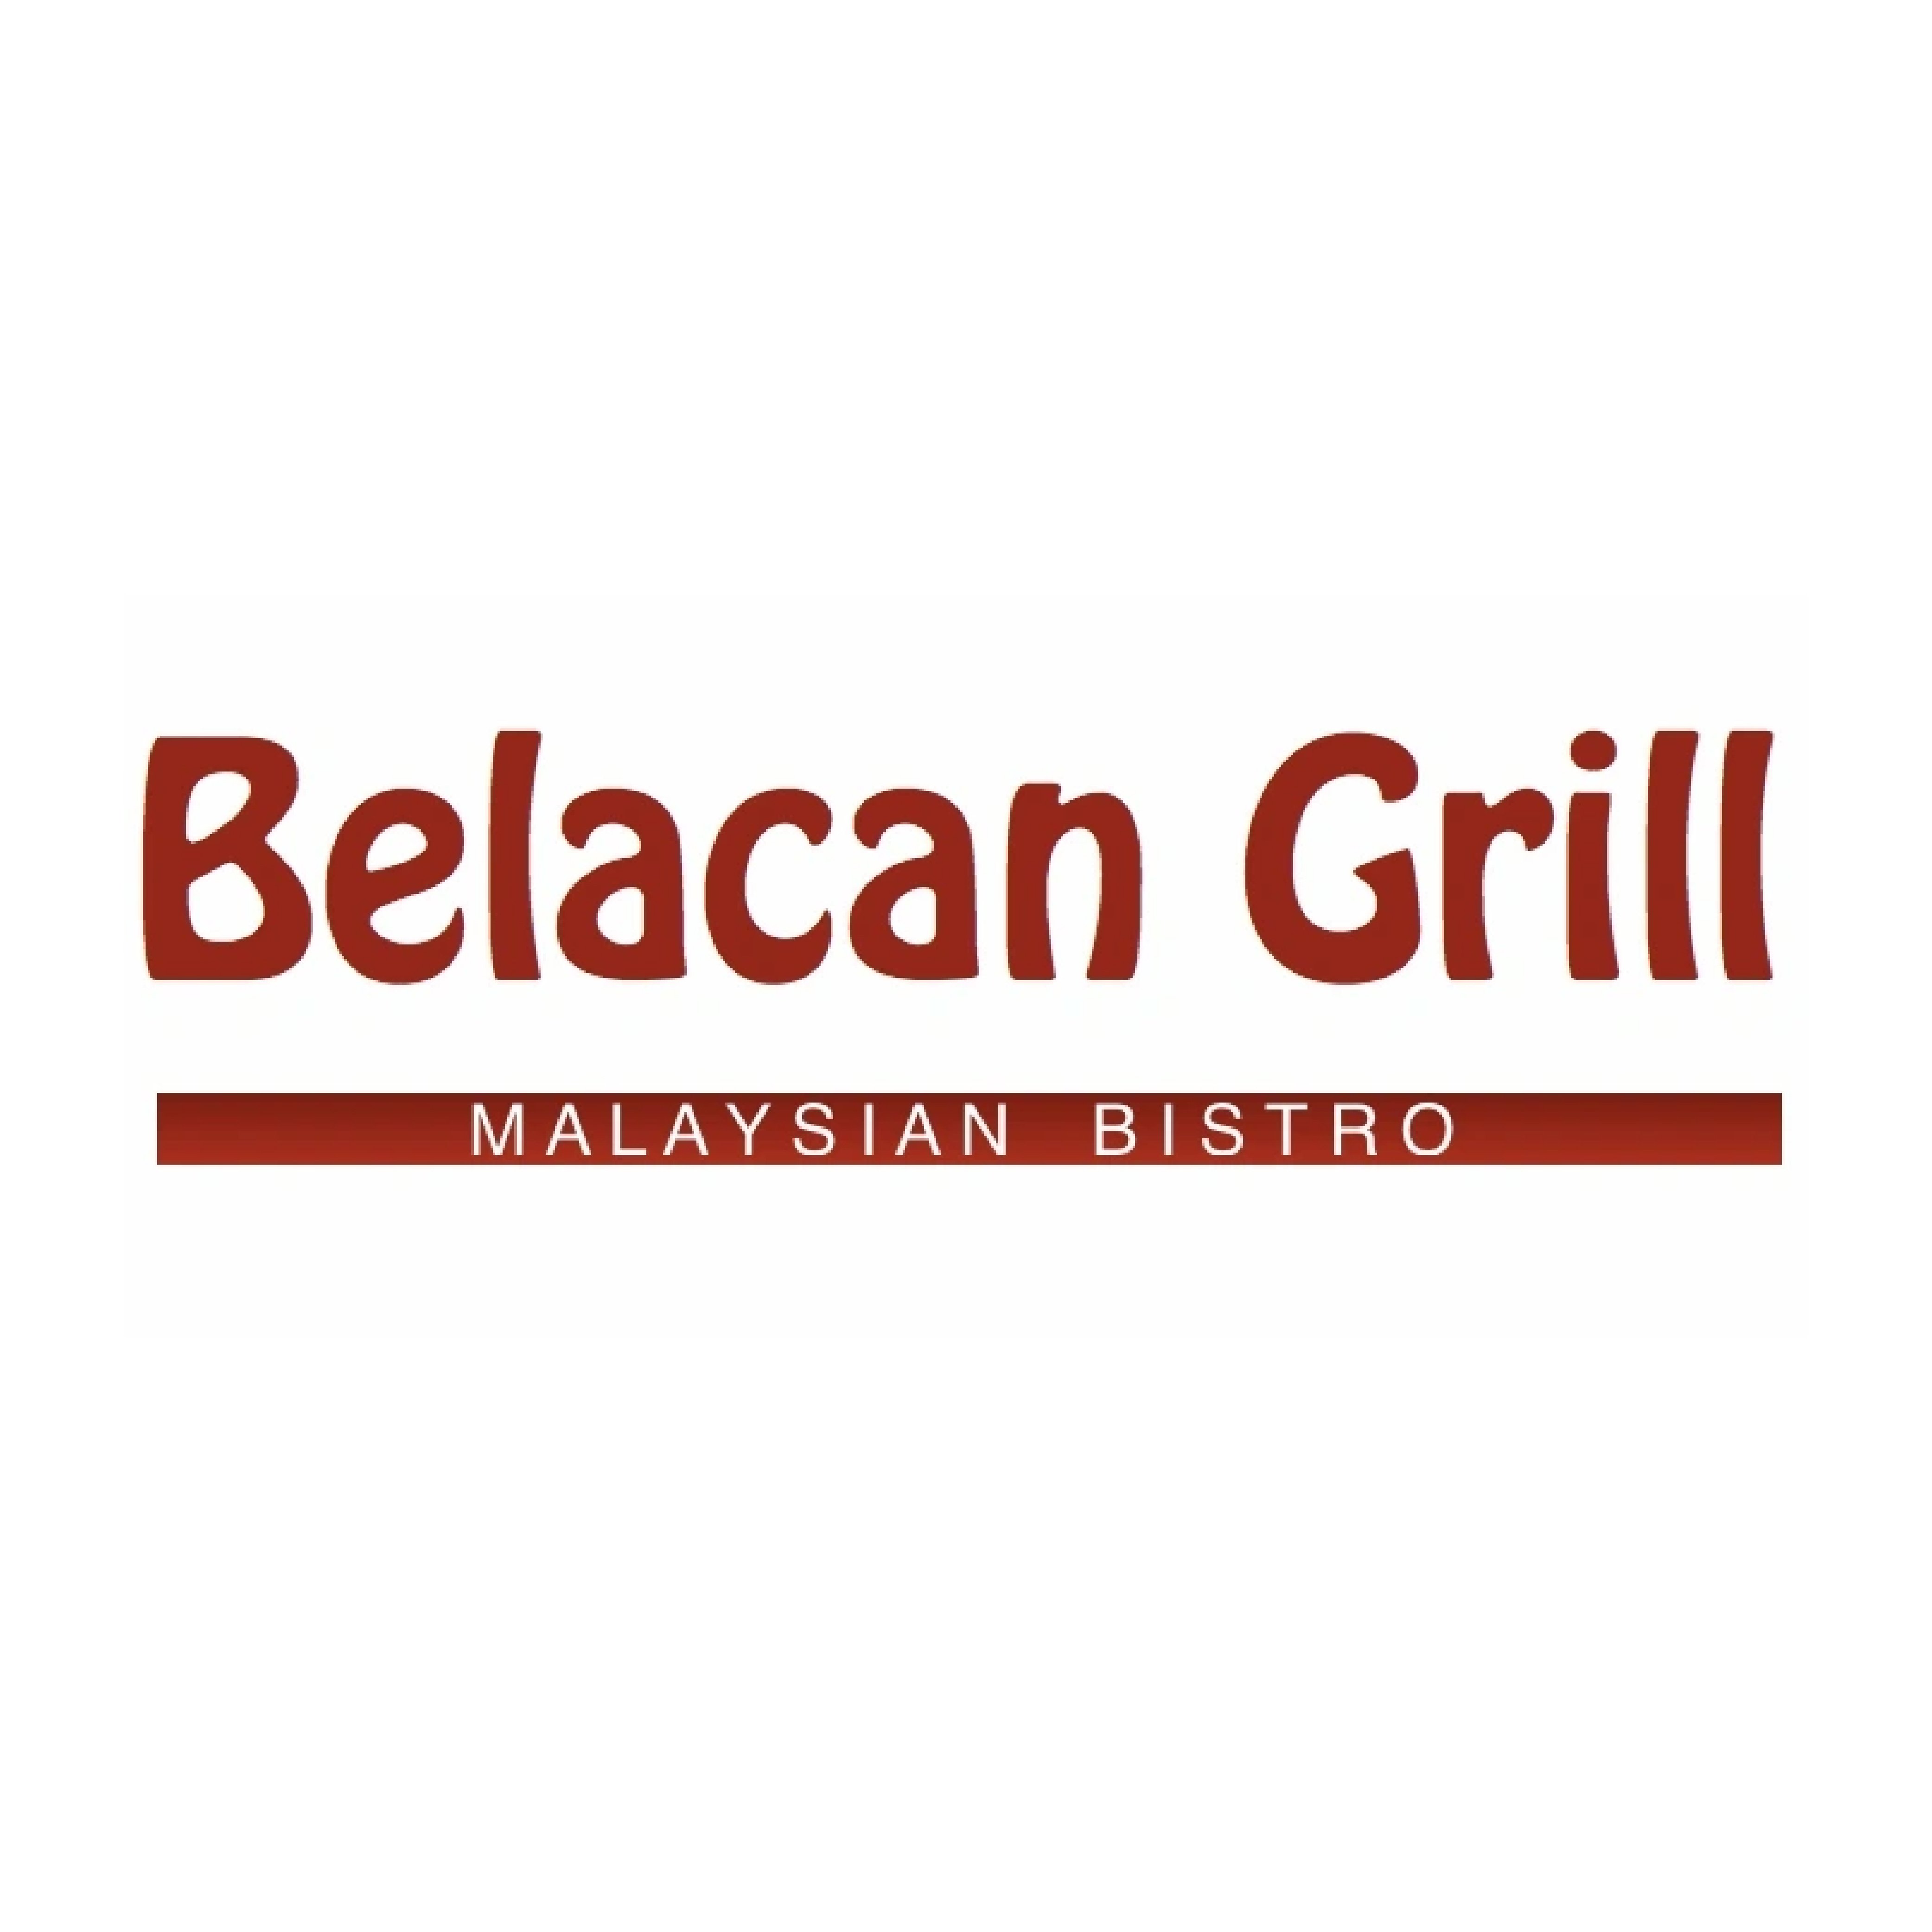 Belacan Grill - Malaysian Bistro